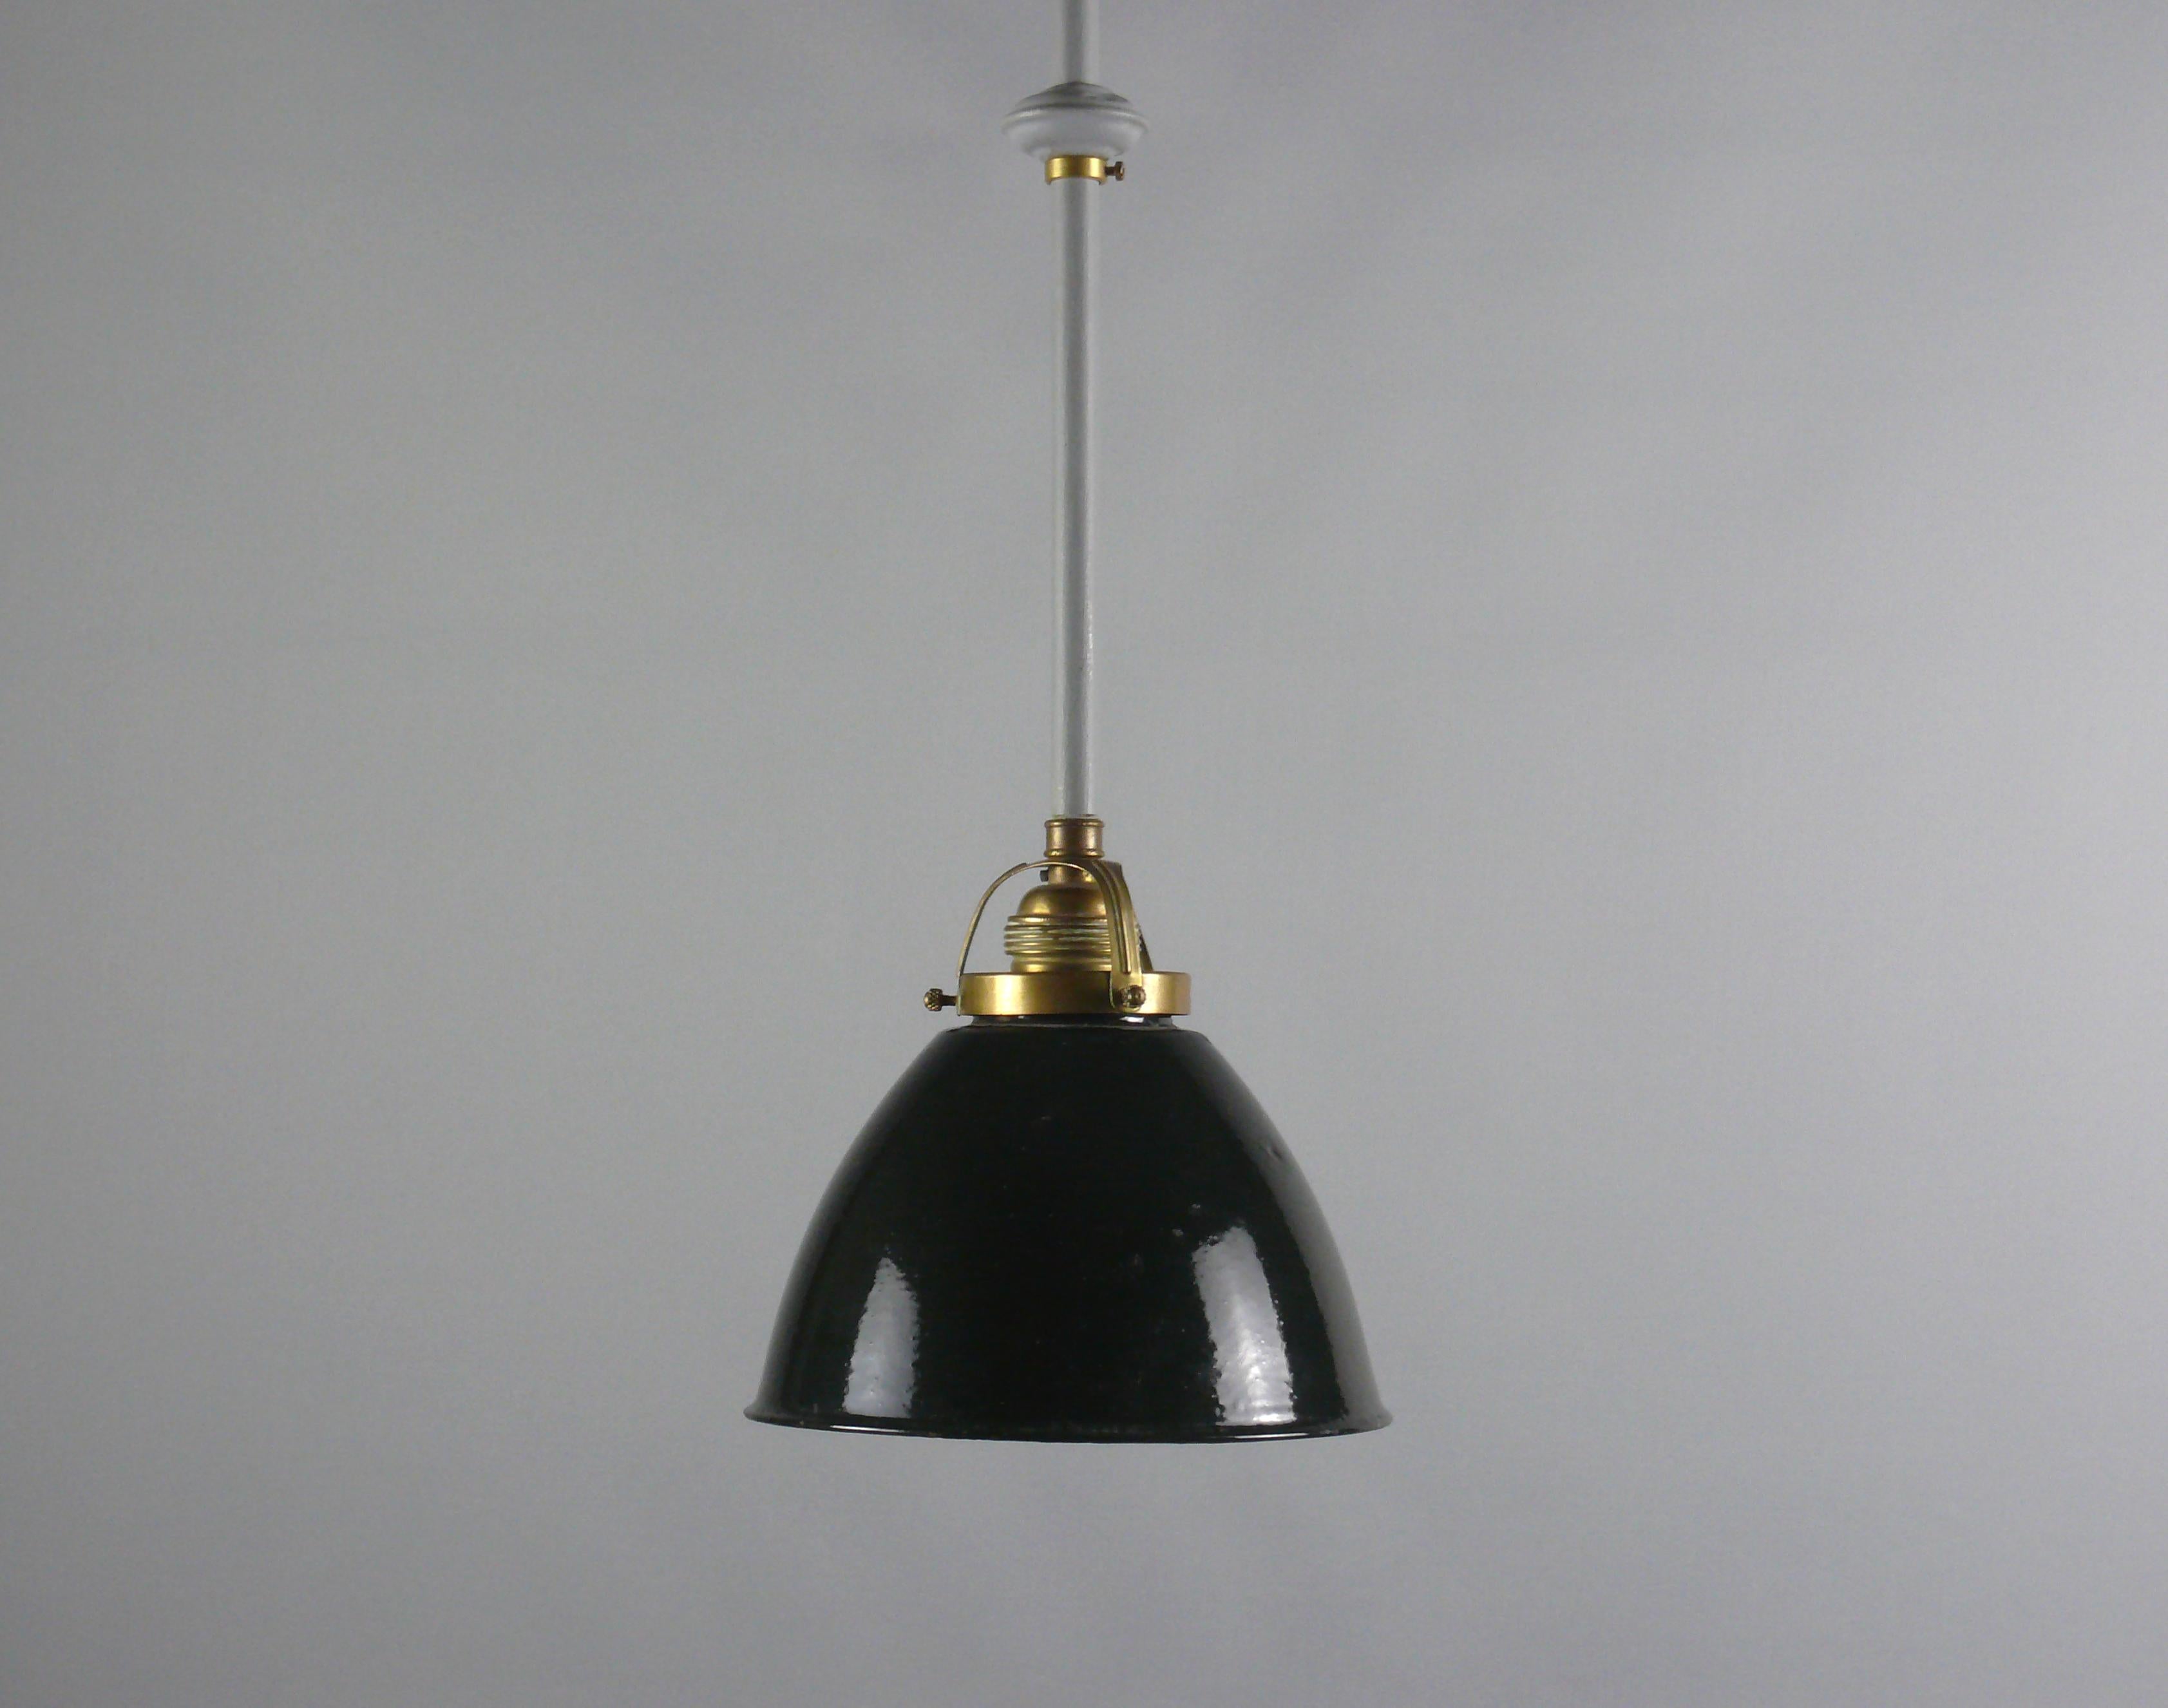 Old pendant lamp with enamel shade in working condition*. Brass frame with porcelain ring and brass umbrella holder with beautiful knurled screws. Bracket painted gray.

Total height 60 cm
Shade diameter 18 cm
Brass socket E 27 - normal light bulbs